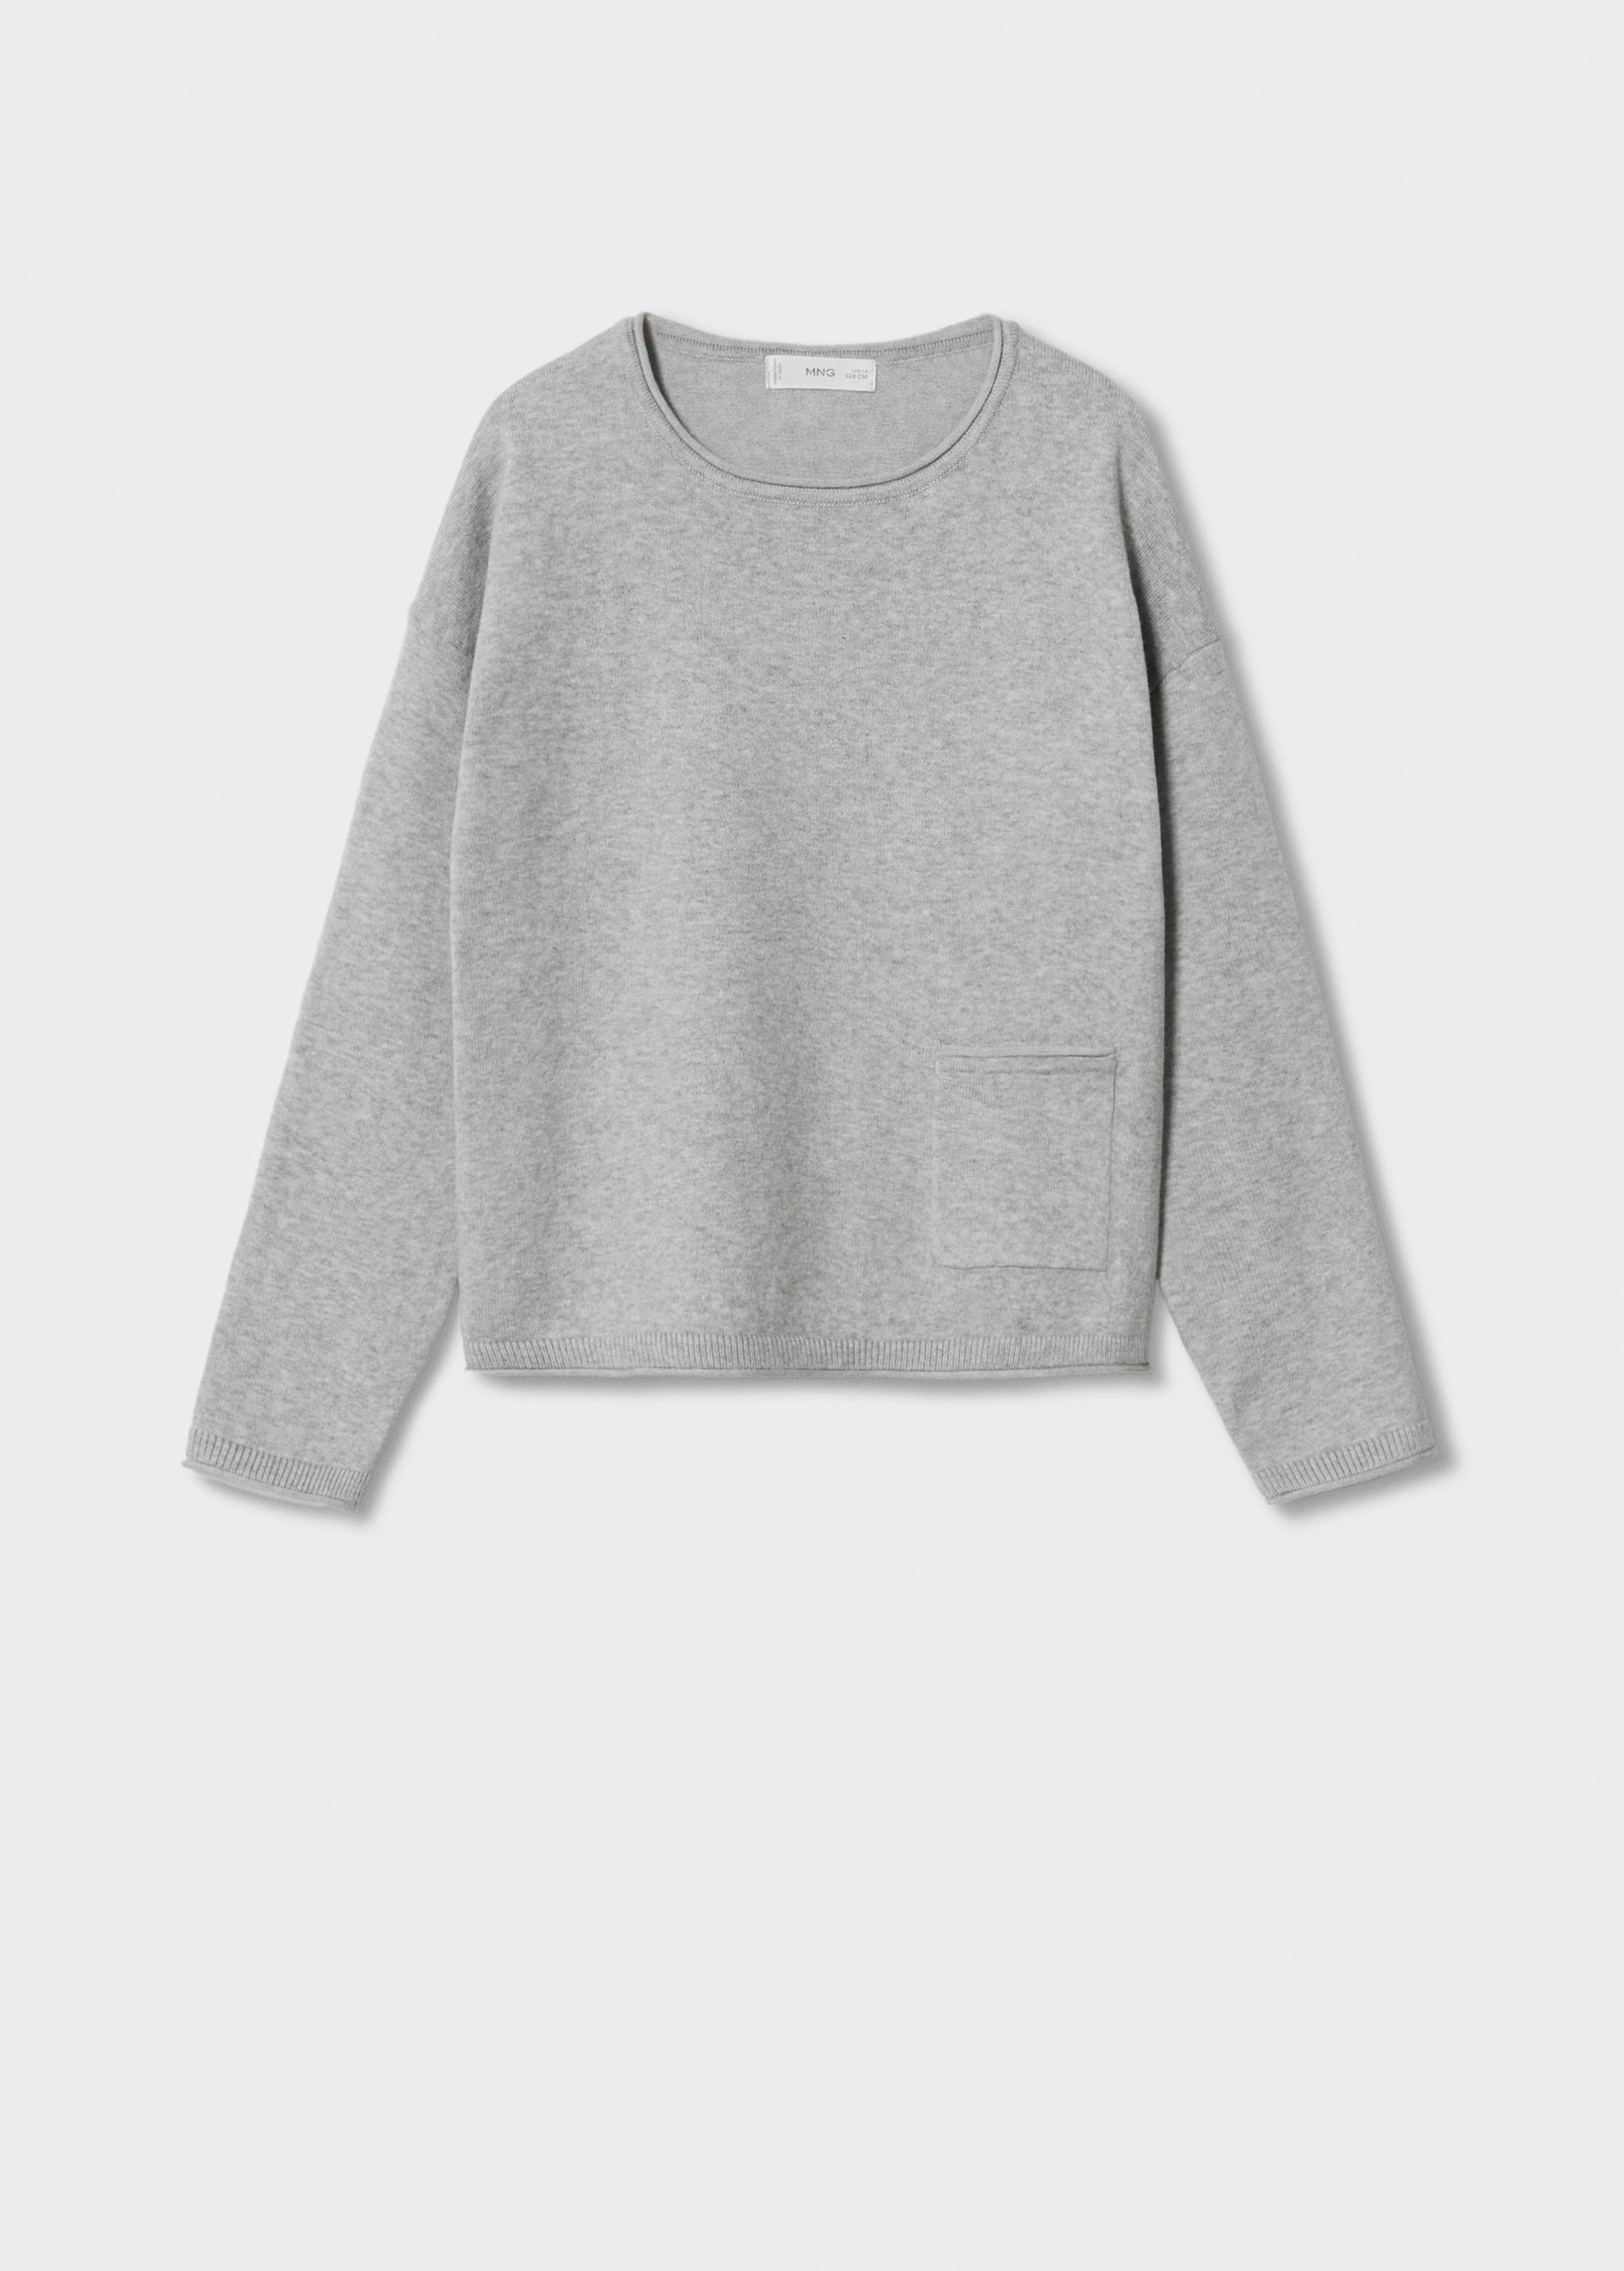 Patch pocket cotton sweater - Article without model